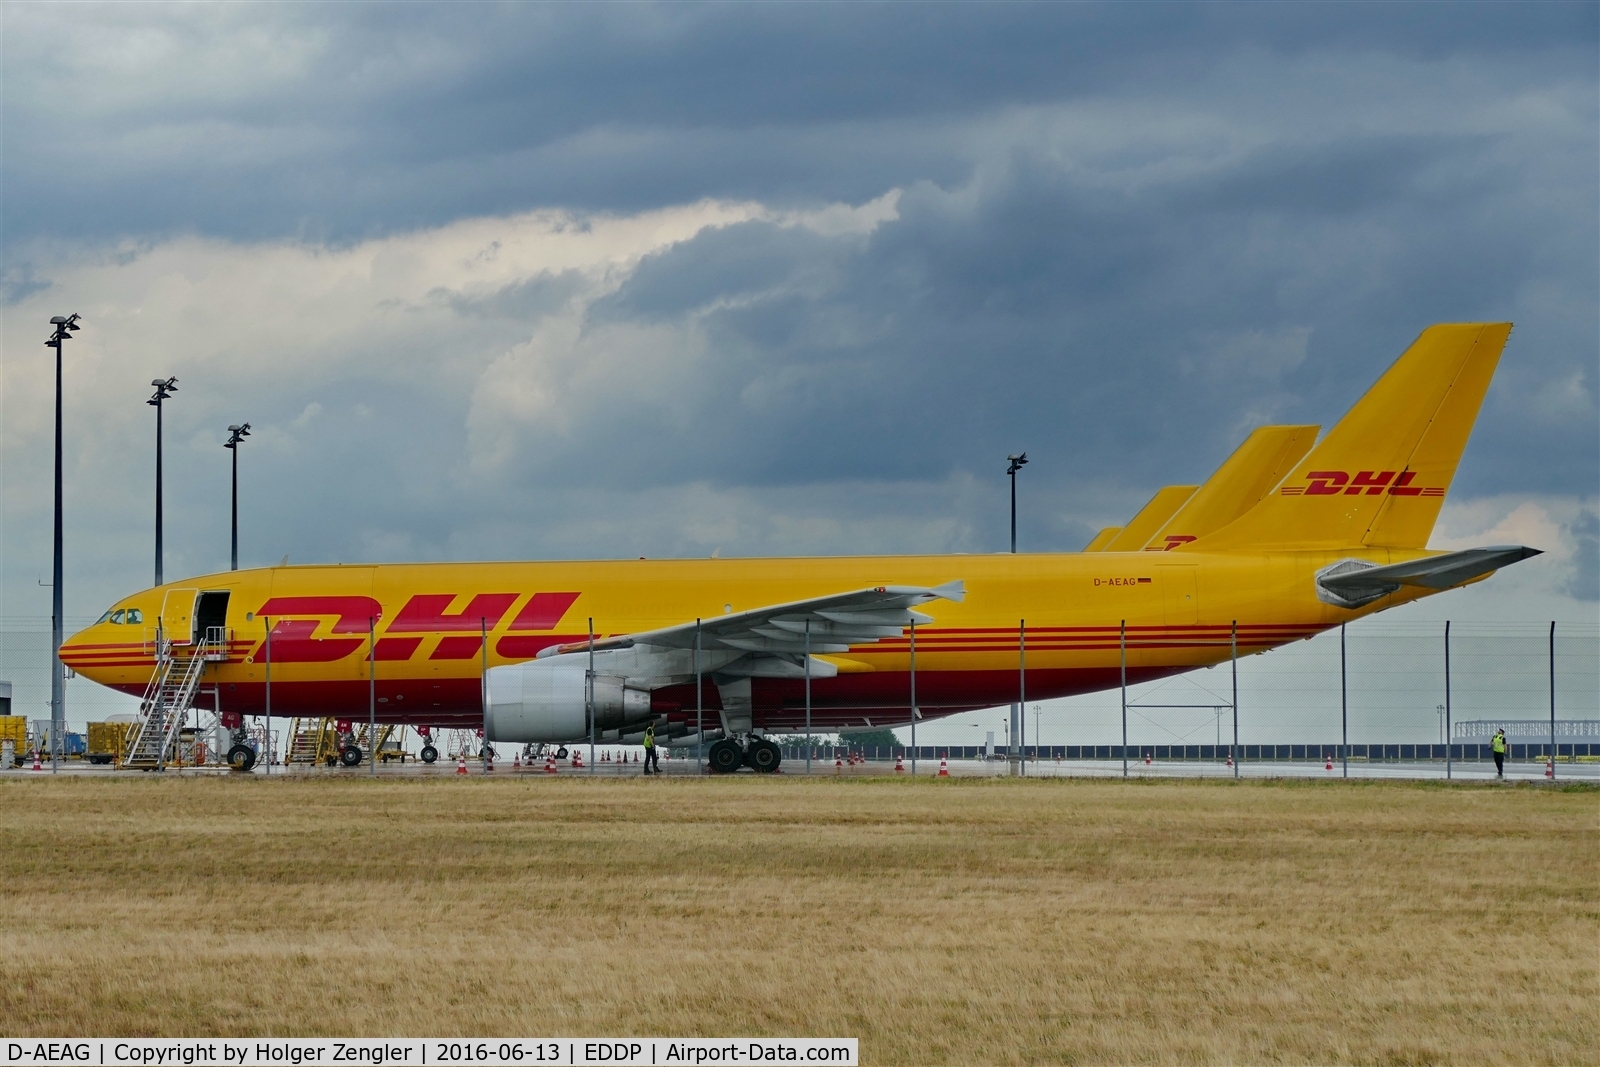 D-AEAG, 1991 Airbus A300B4-622R(F) C/N 621, Using sunday rest for representing the colors of DHL on LEJ...